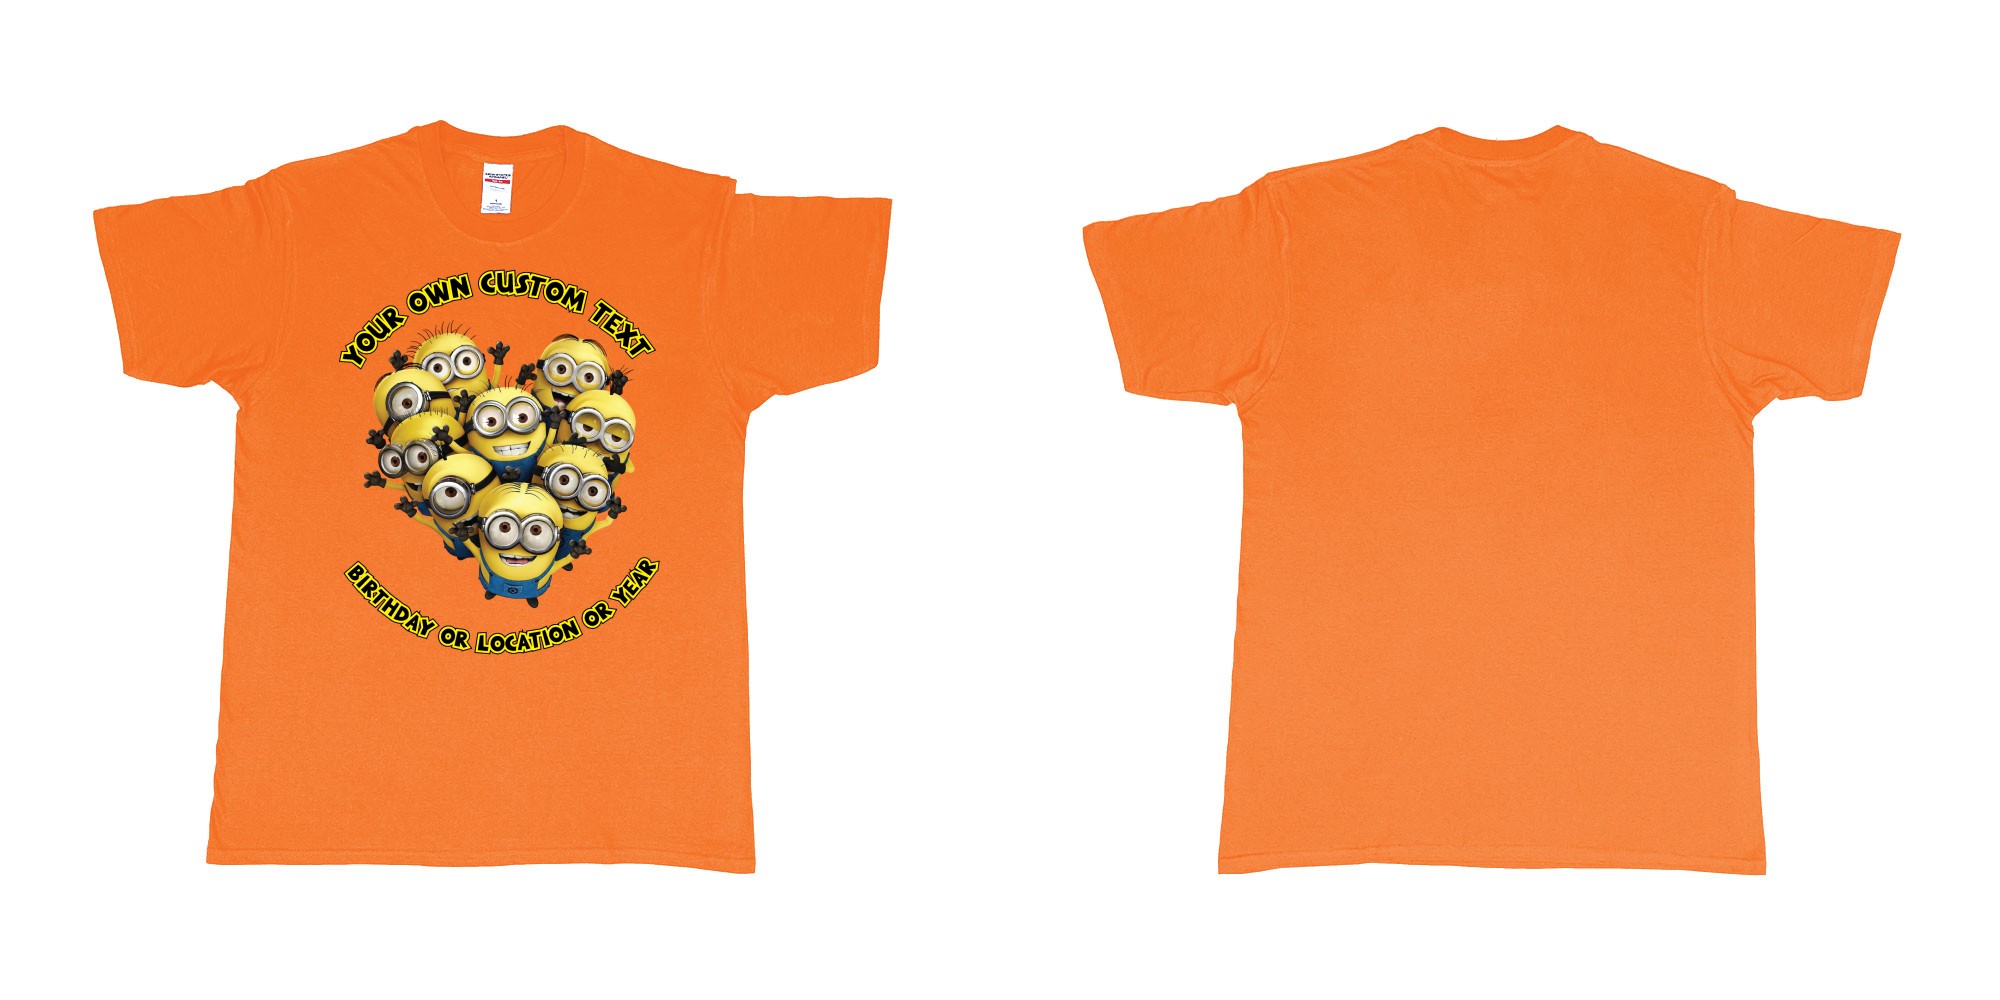 Custom tshirt design minions celebrating you in fabric color orange choice your own text made in Bali by The Pirate Way